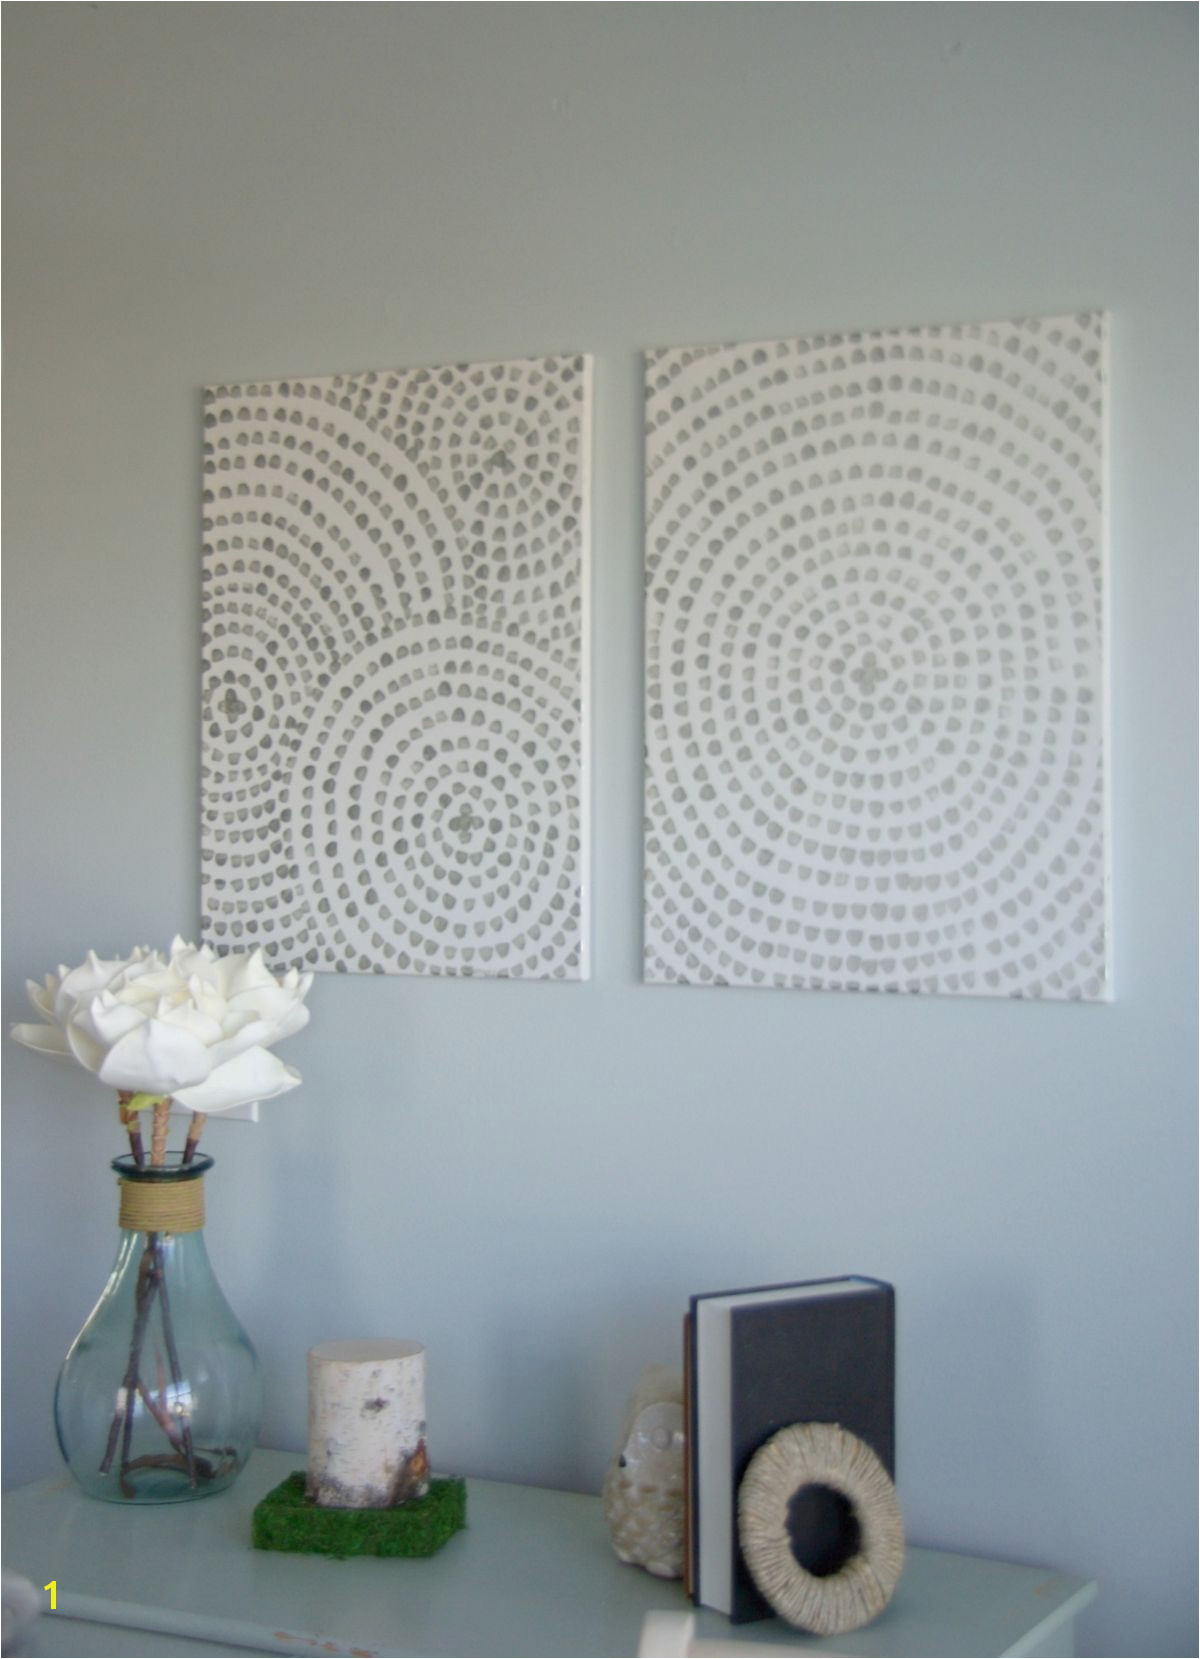 DIY Canvas Wall Art – A Low Cost Way To Add Art To Your Home